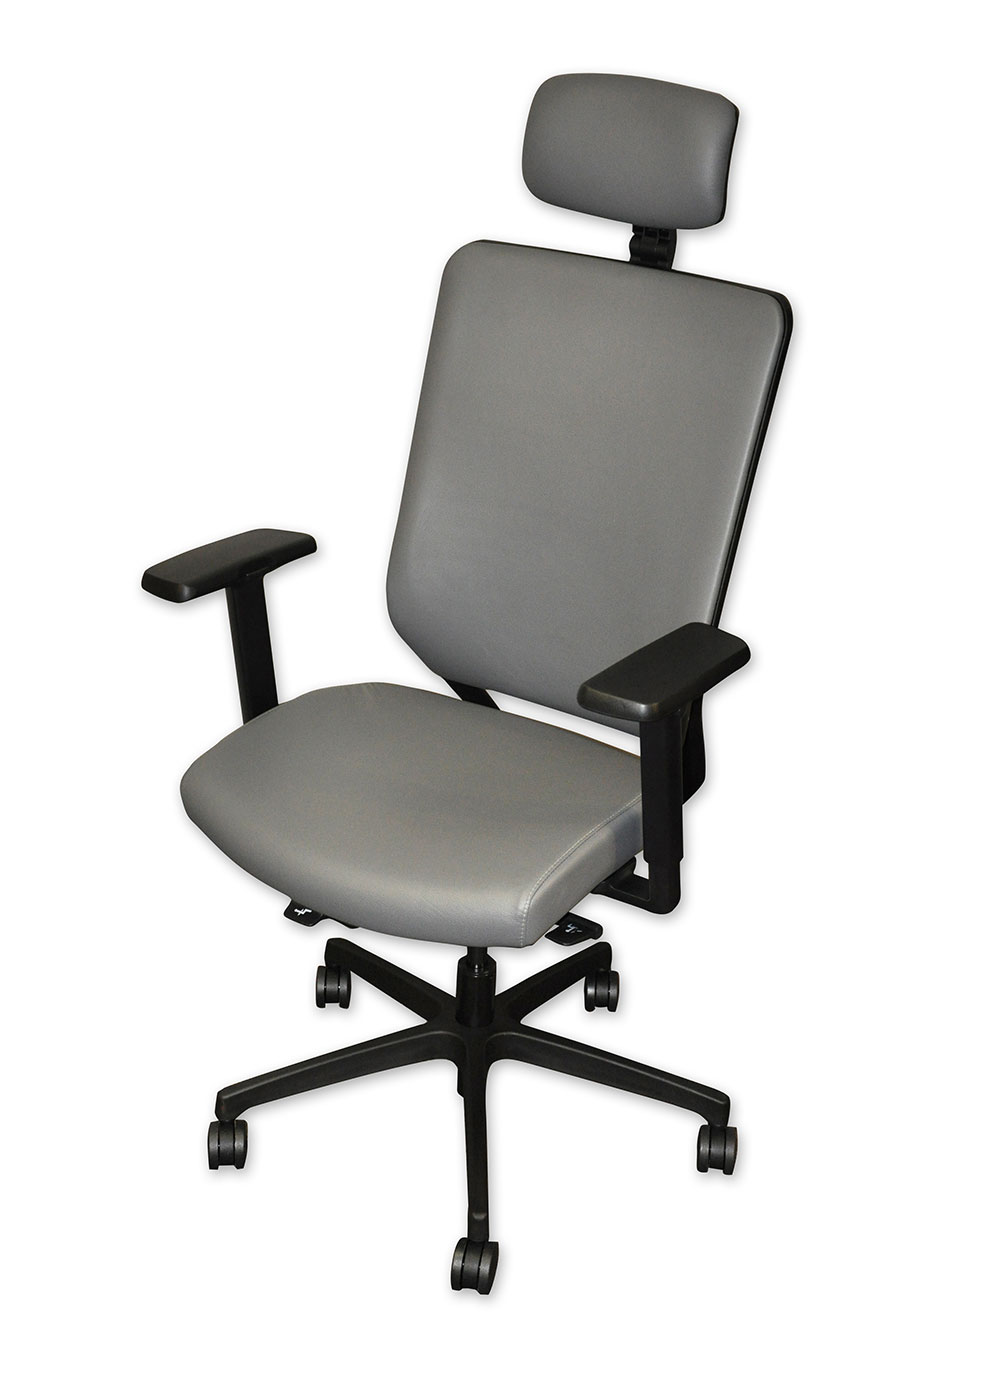 Designer Conference Chairs - Mesh Office Chairs | Podany's